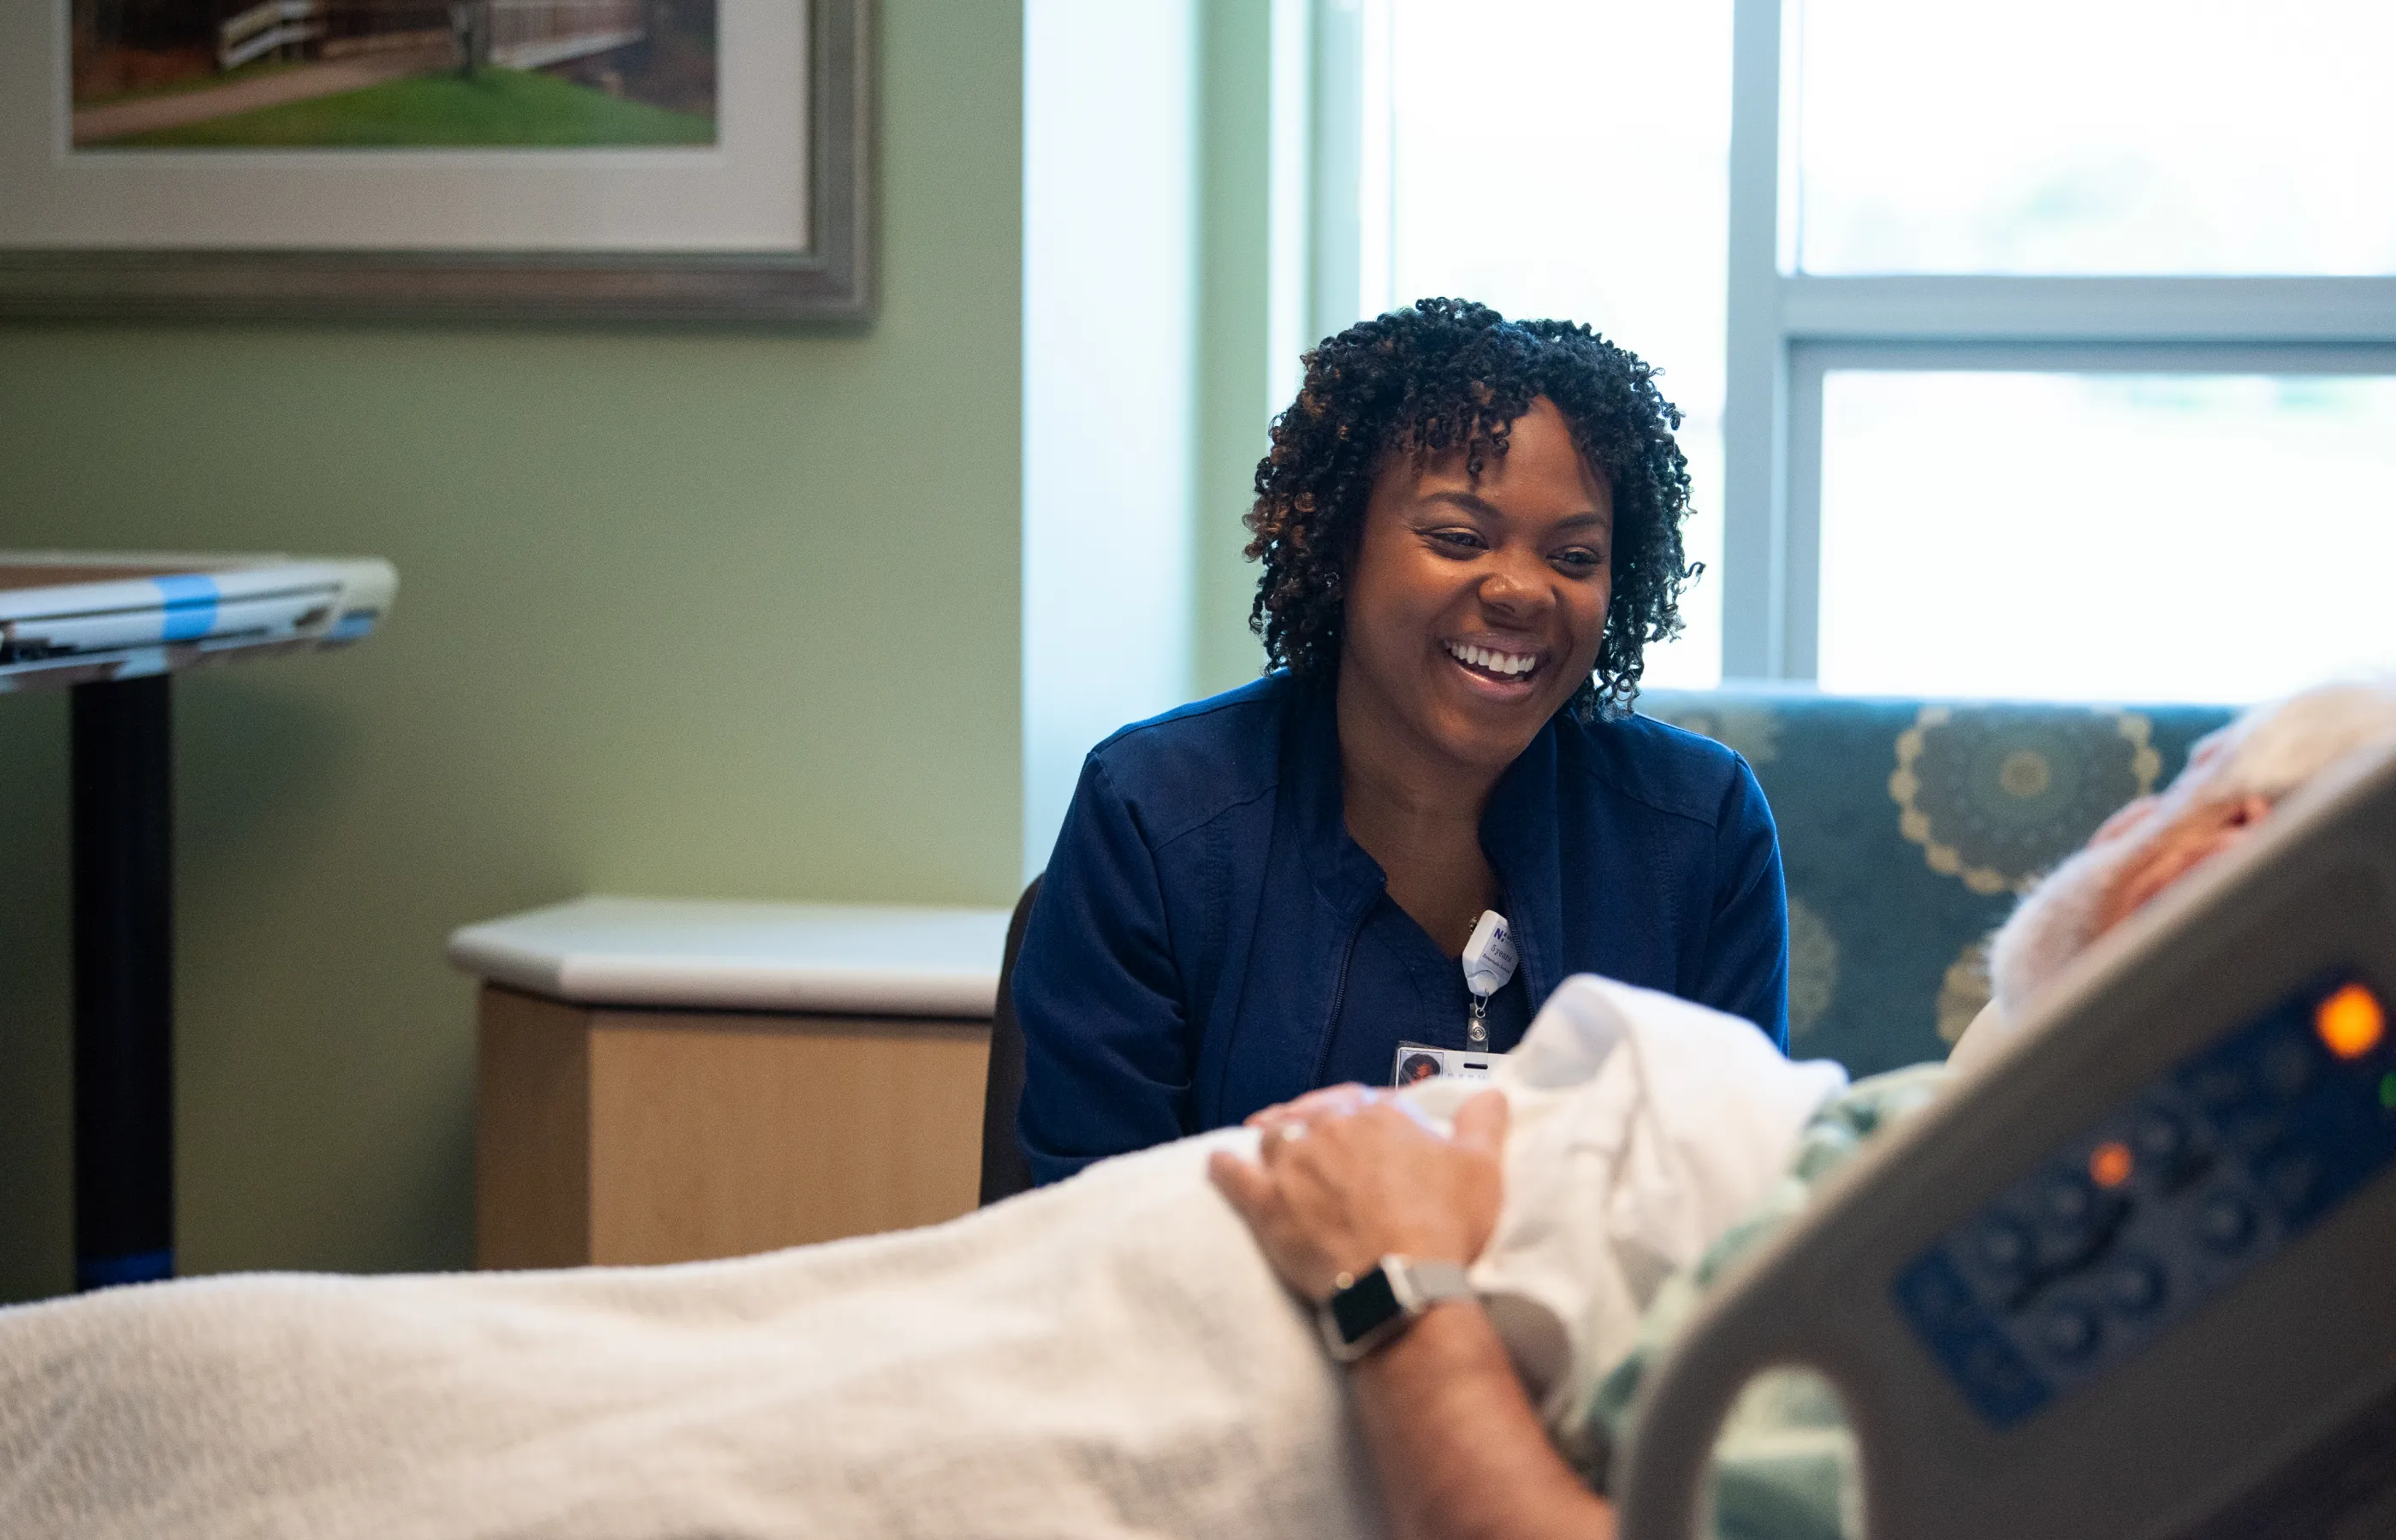 Novant Health nurse is sitting in a patients recovery room. The nurse is smiling and talking with the patient as they lie in bed.